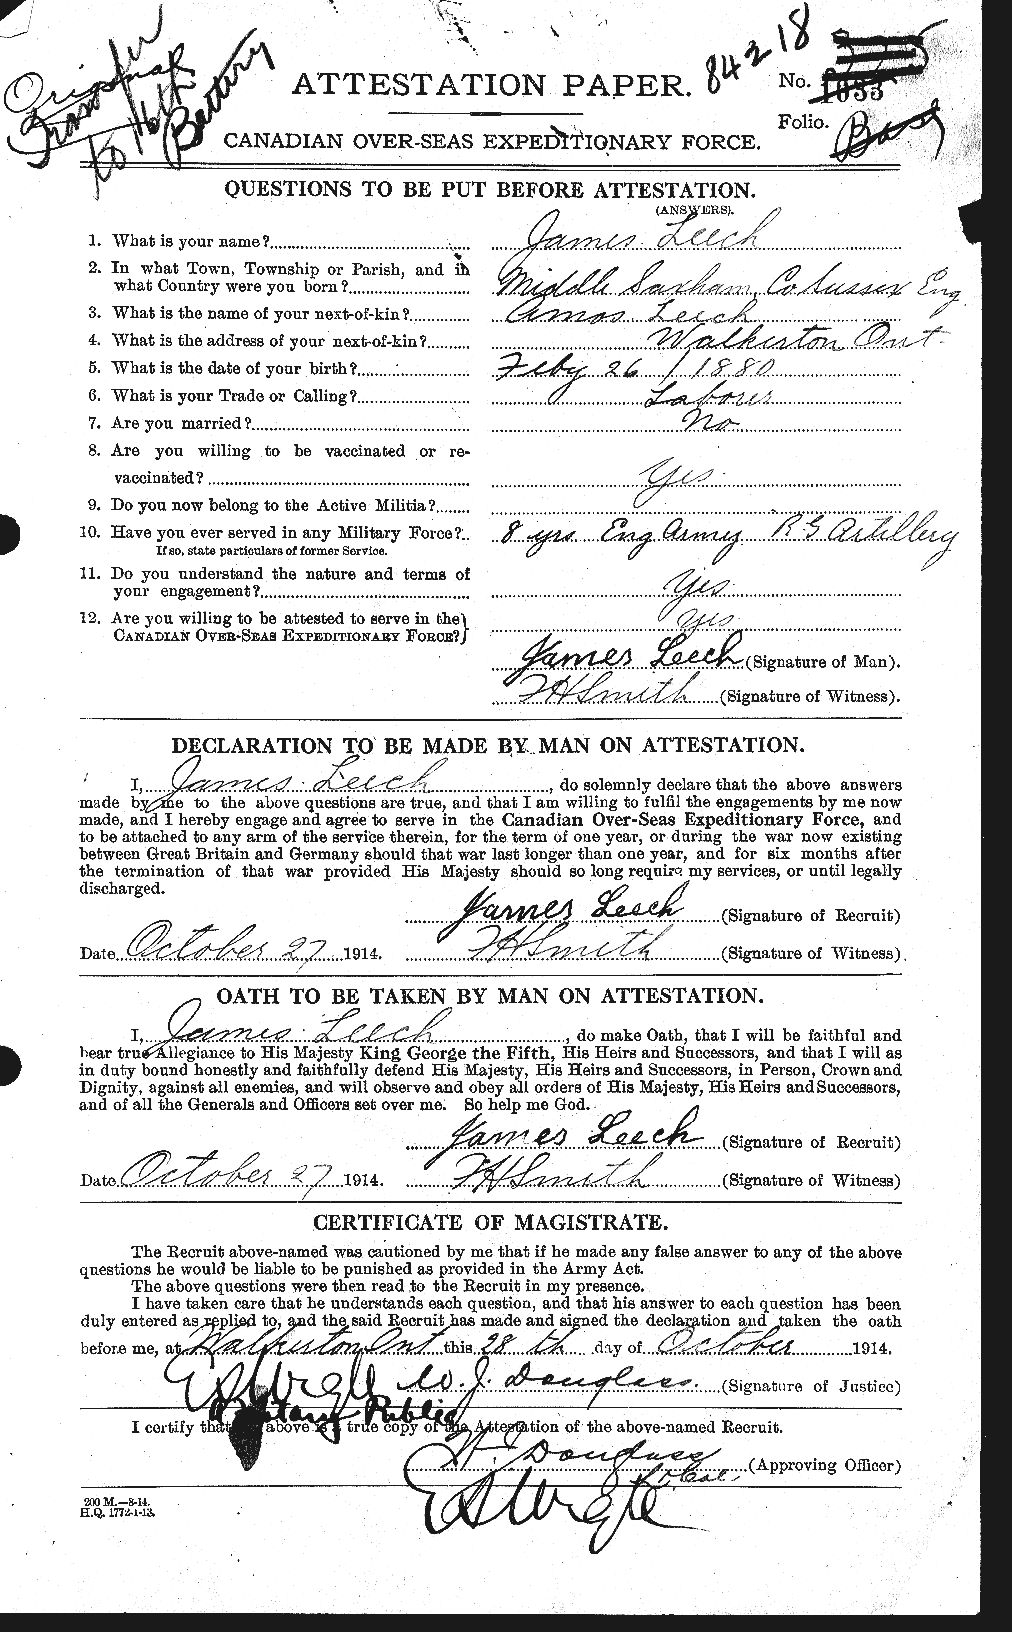 Personnel Records of the First World War - CEF 459191a